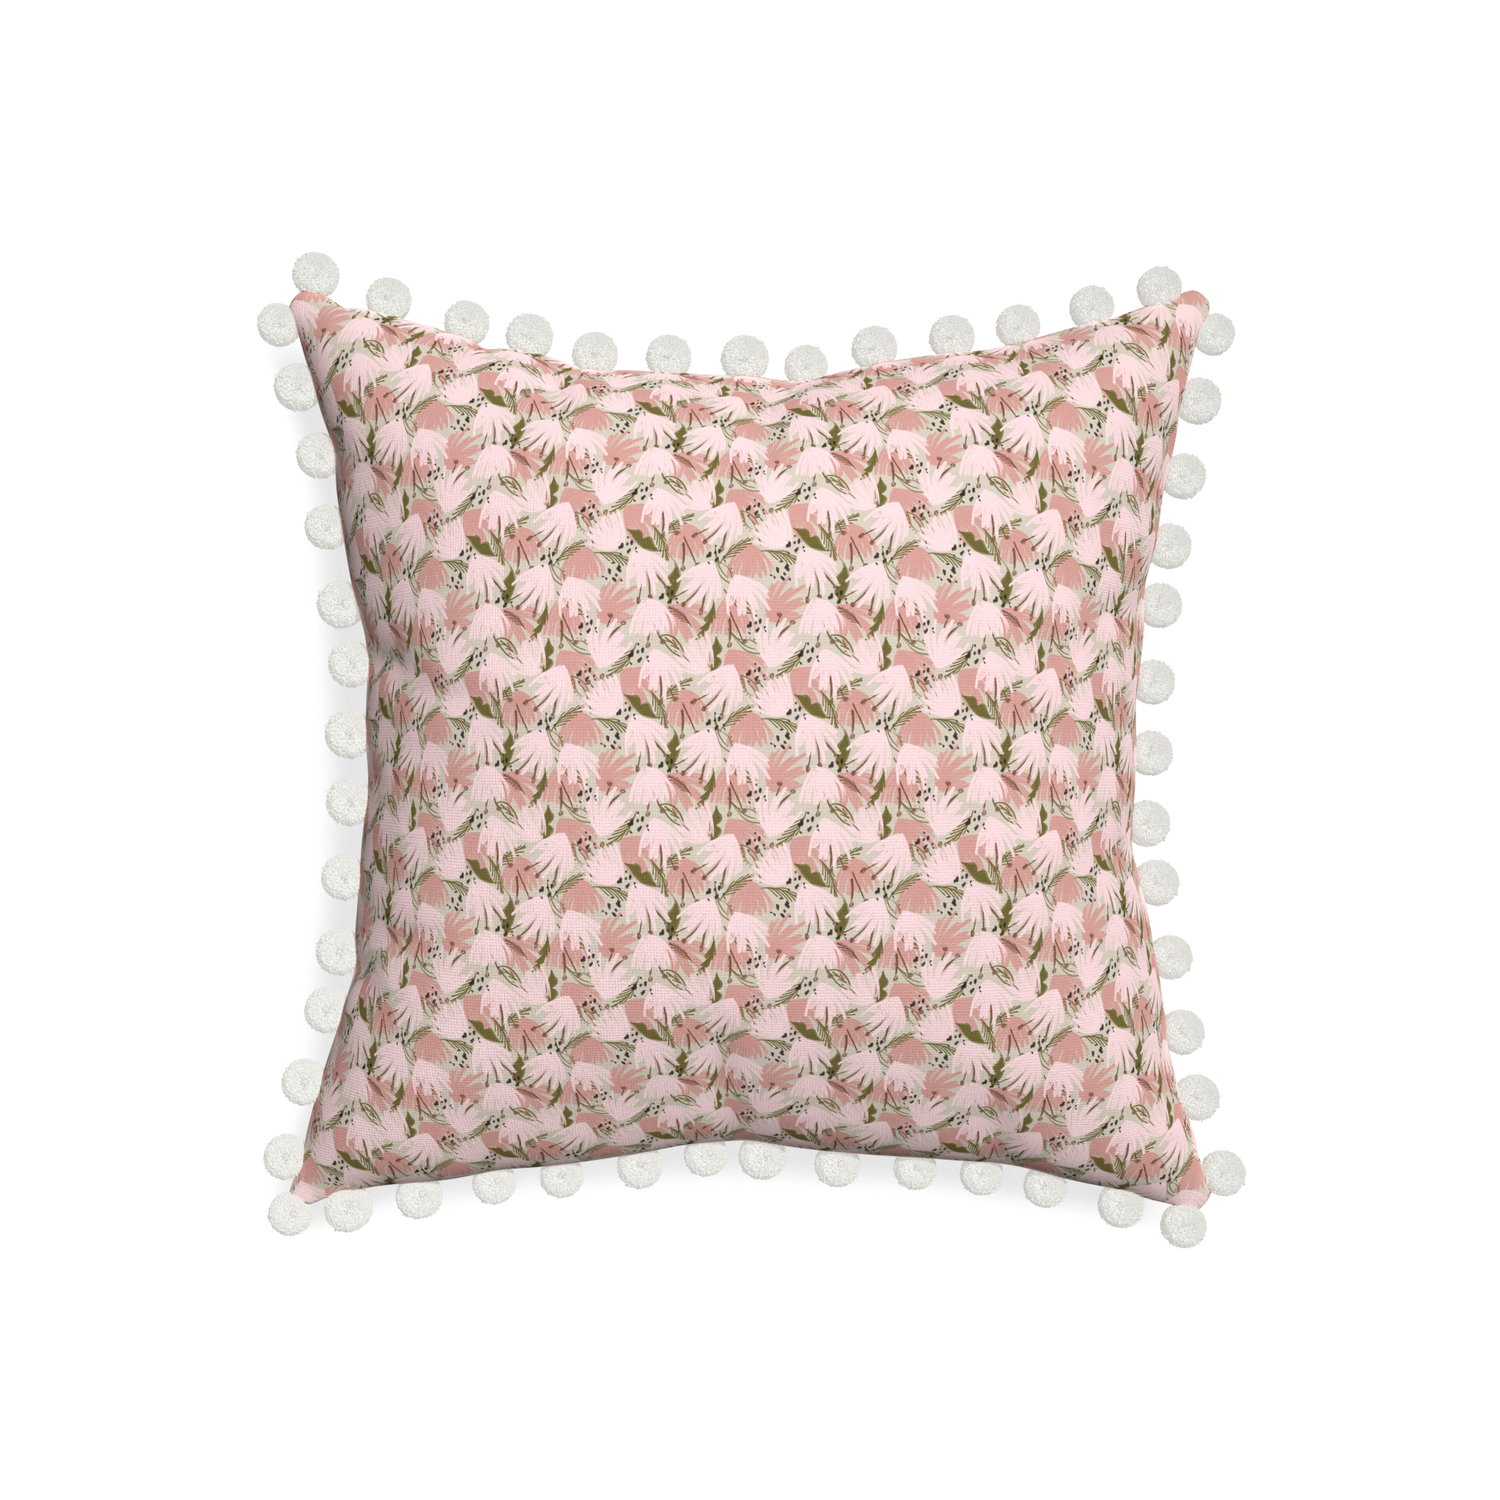 20-square eden pink custom pink floralpillow with snow pom pom on white background